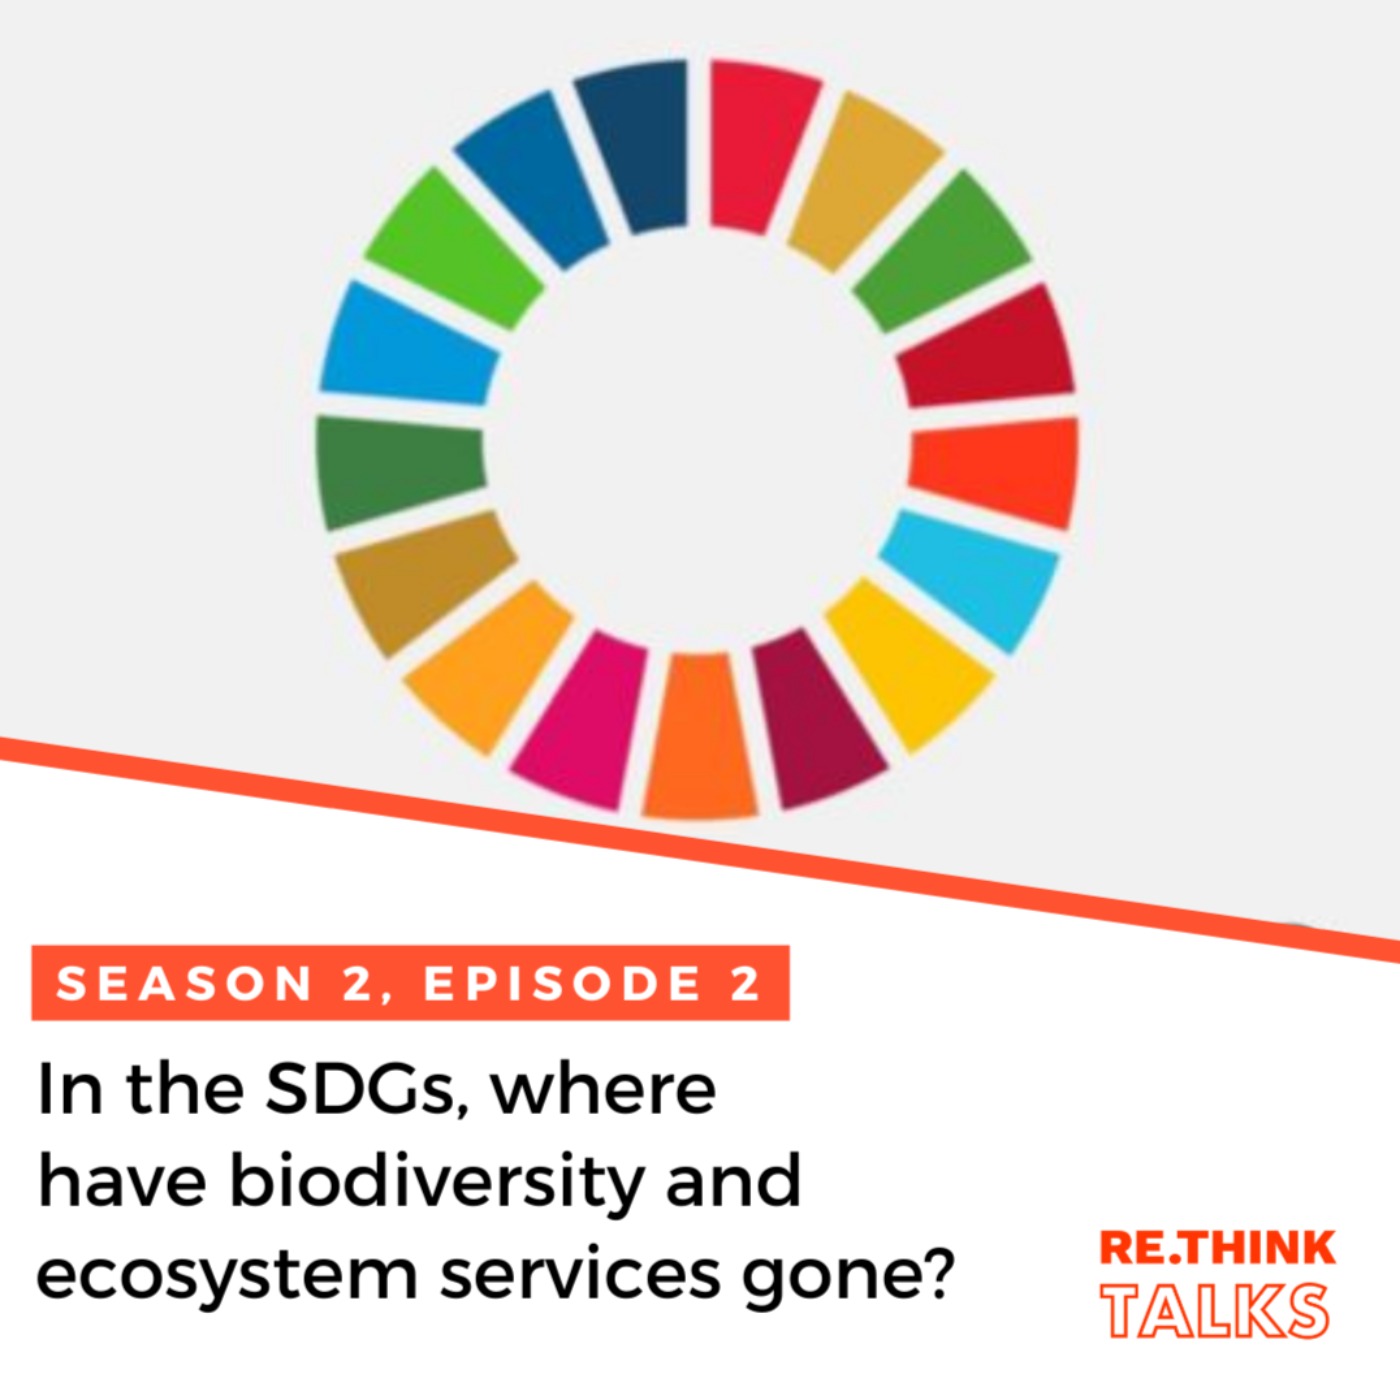 In the SDGs, where have biodiversity and ecosystem services gone?